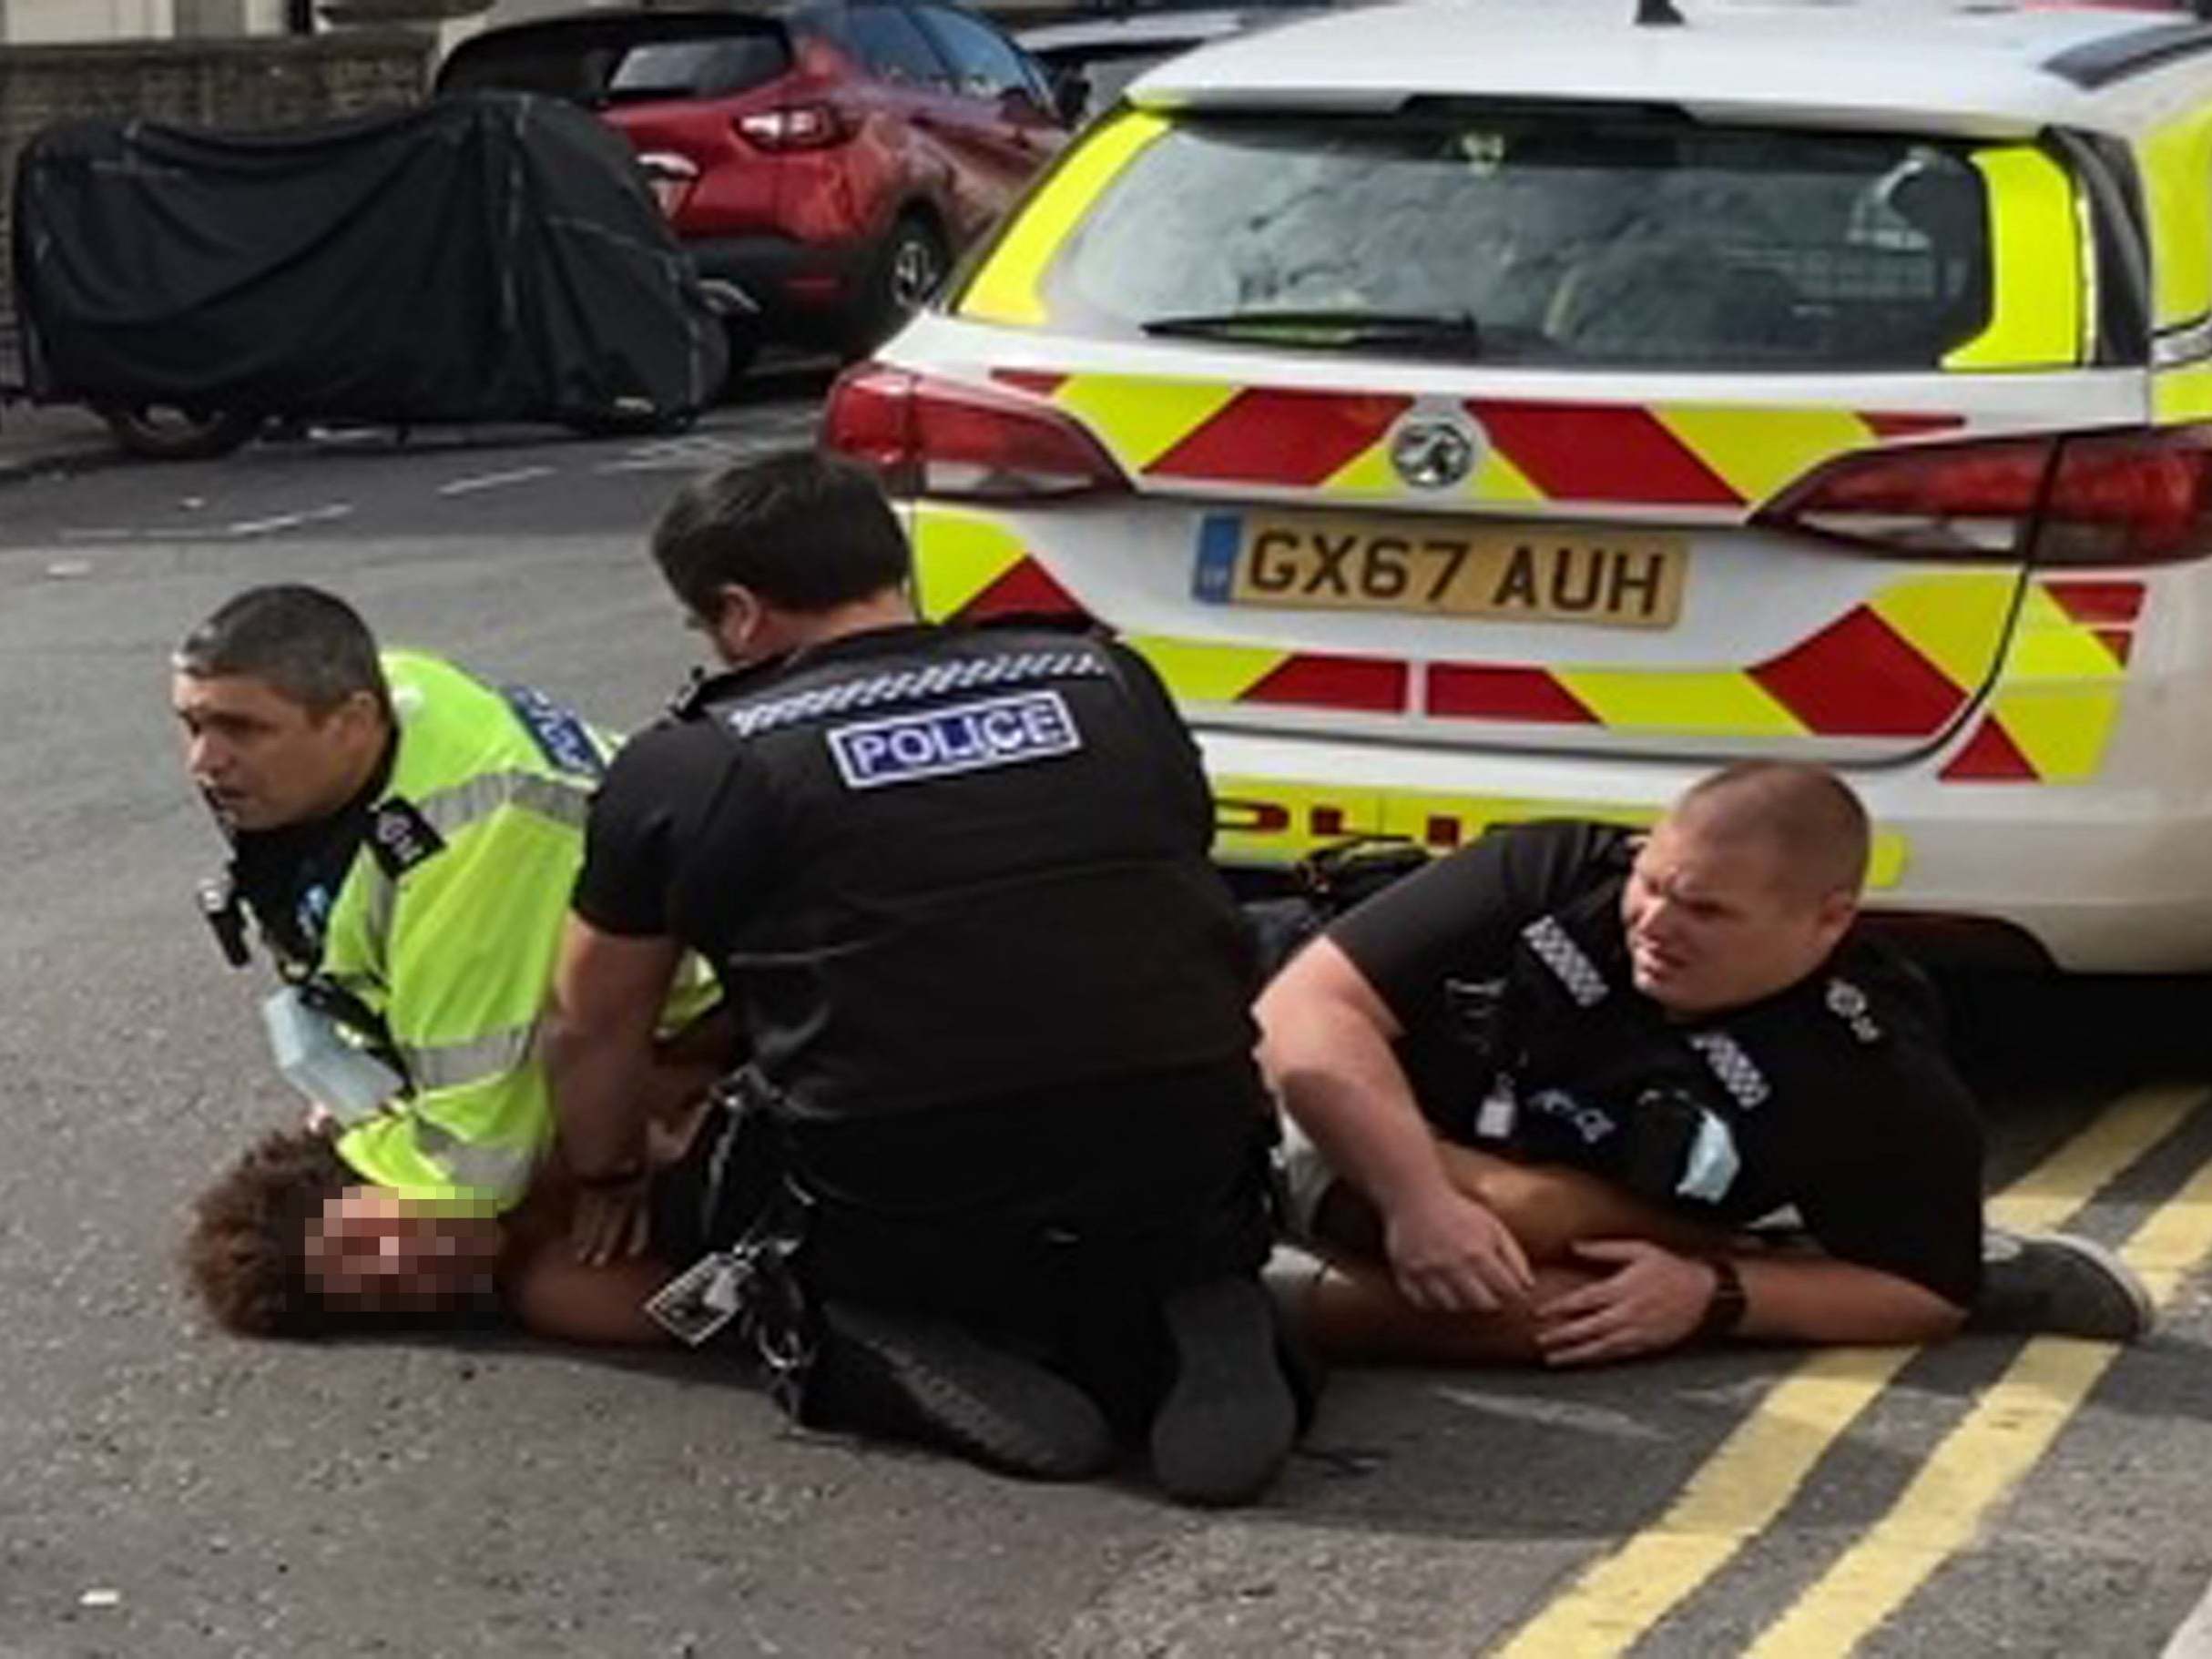 Sussex Police officers pin man on road as he shouts 'I can't breathe'